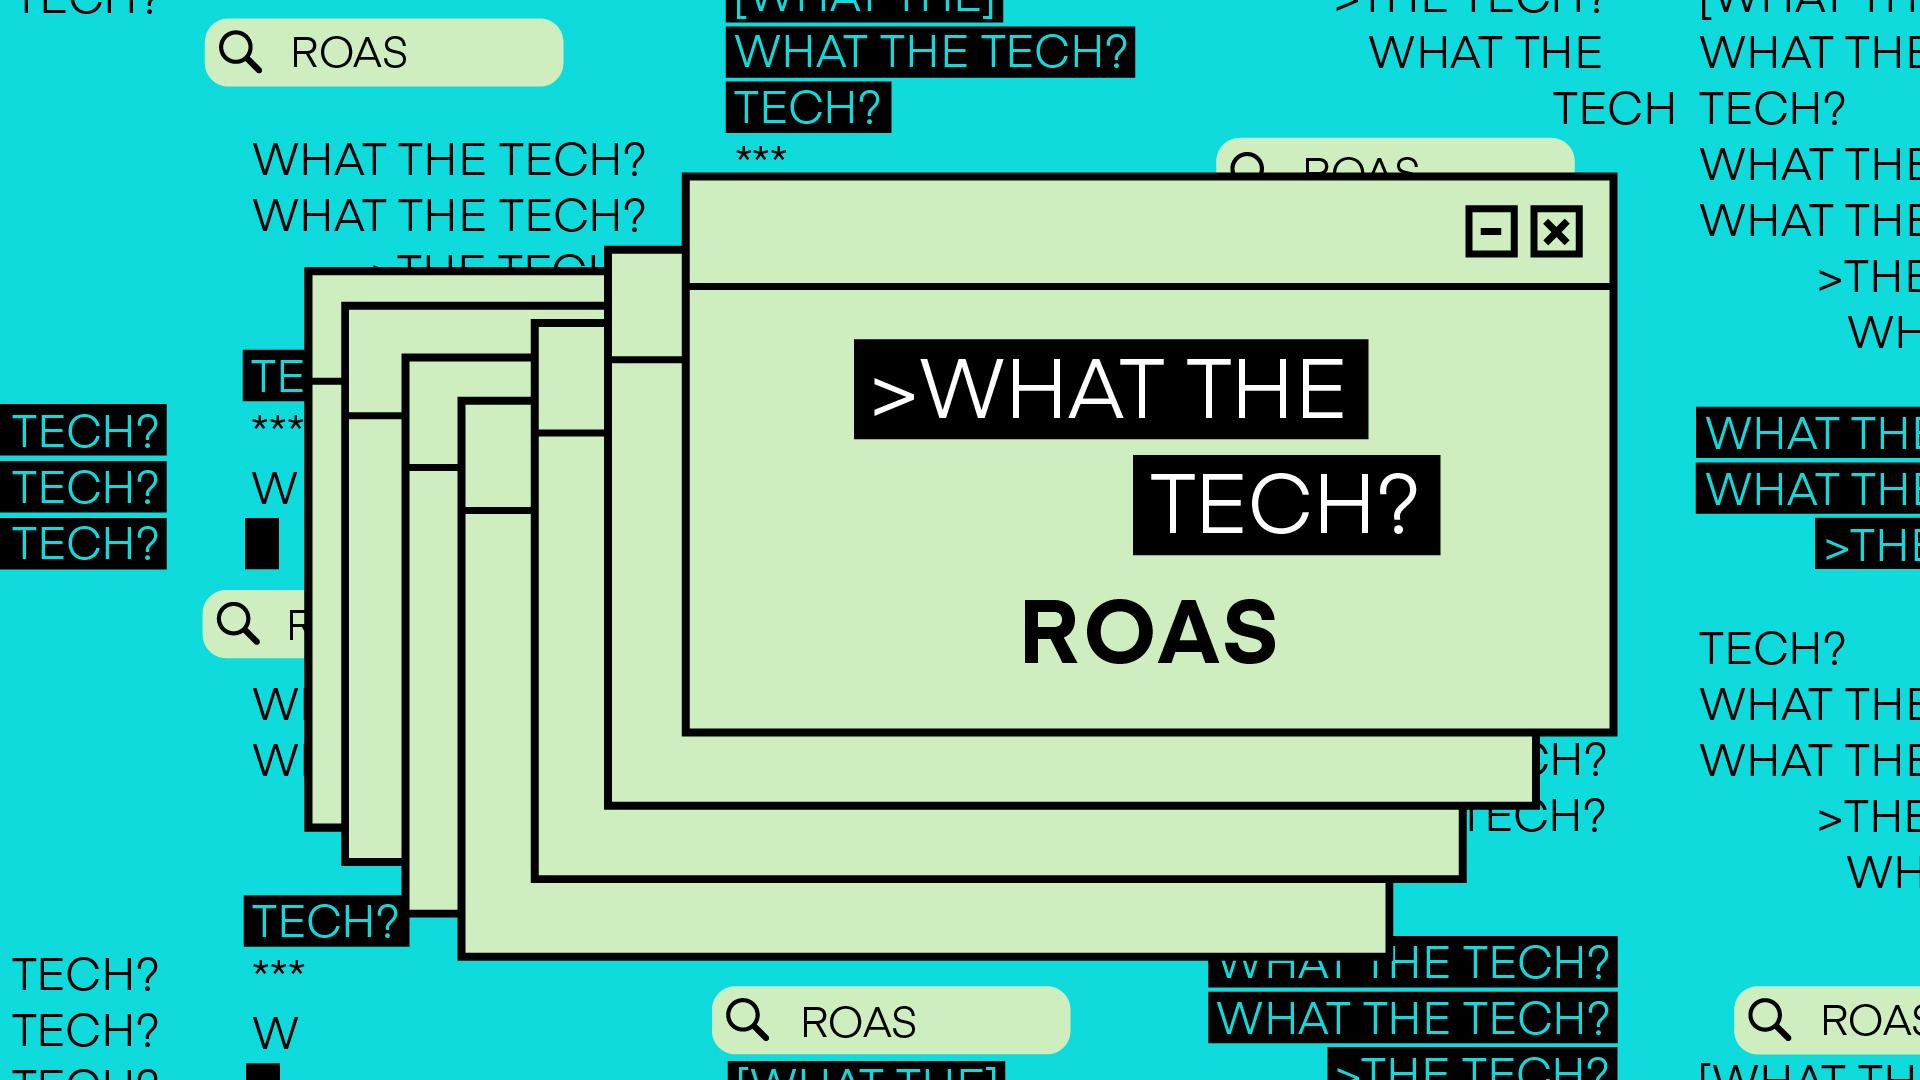 What the Tech is ROAS?